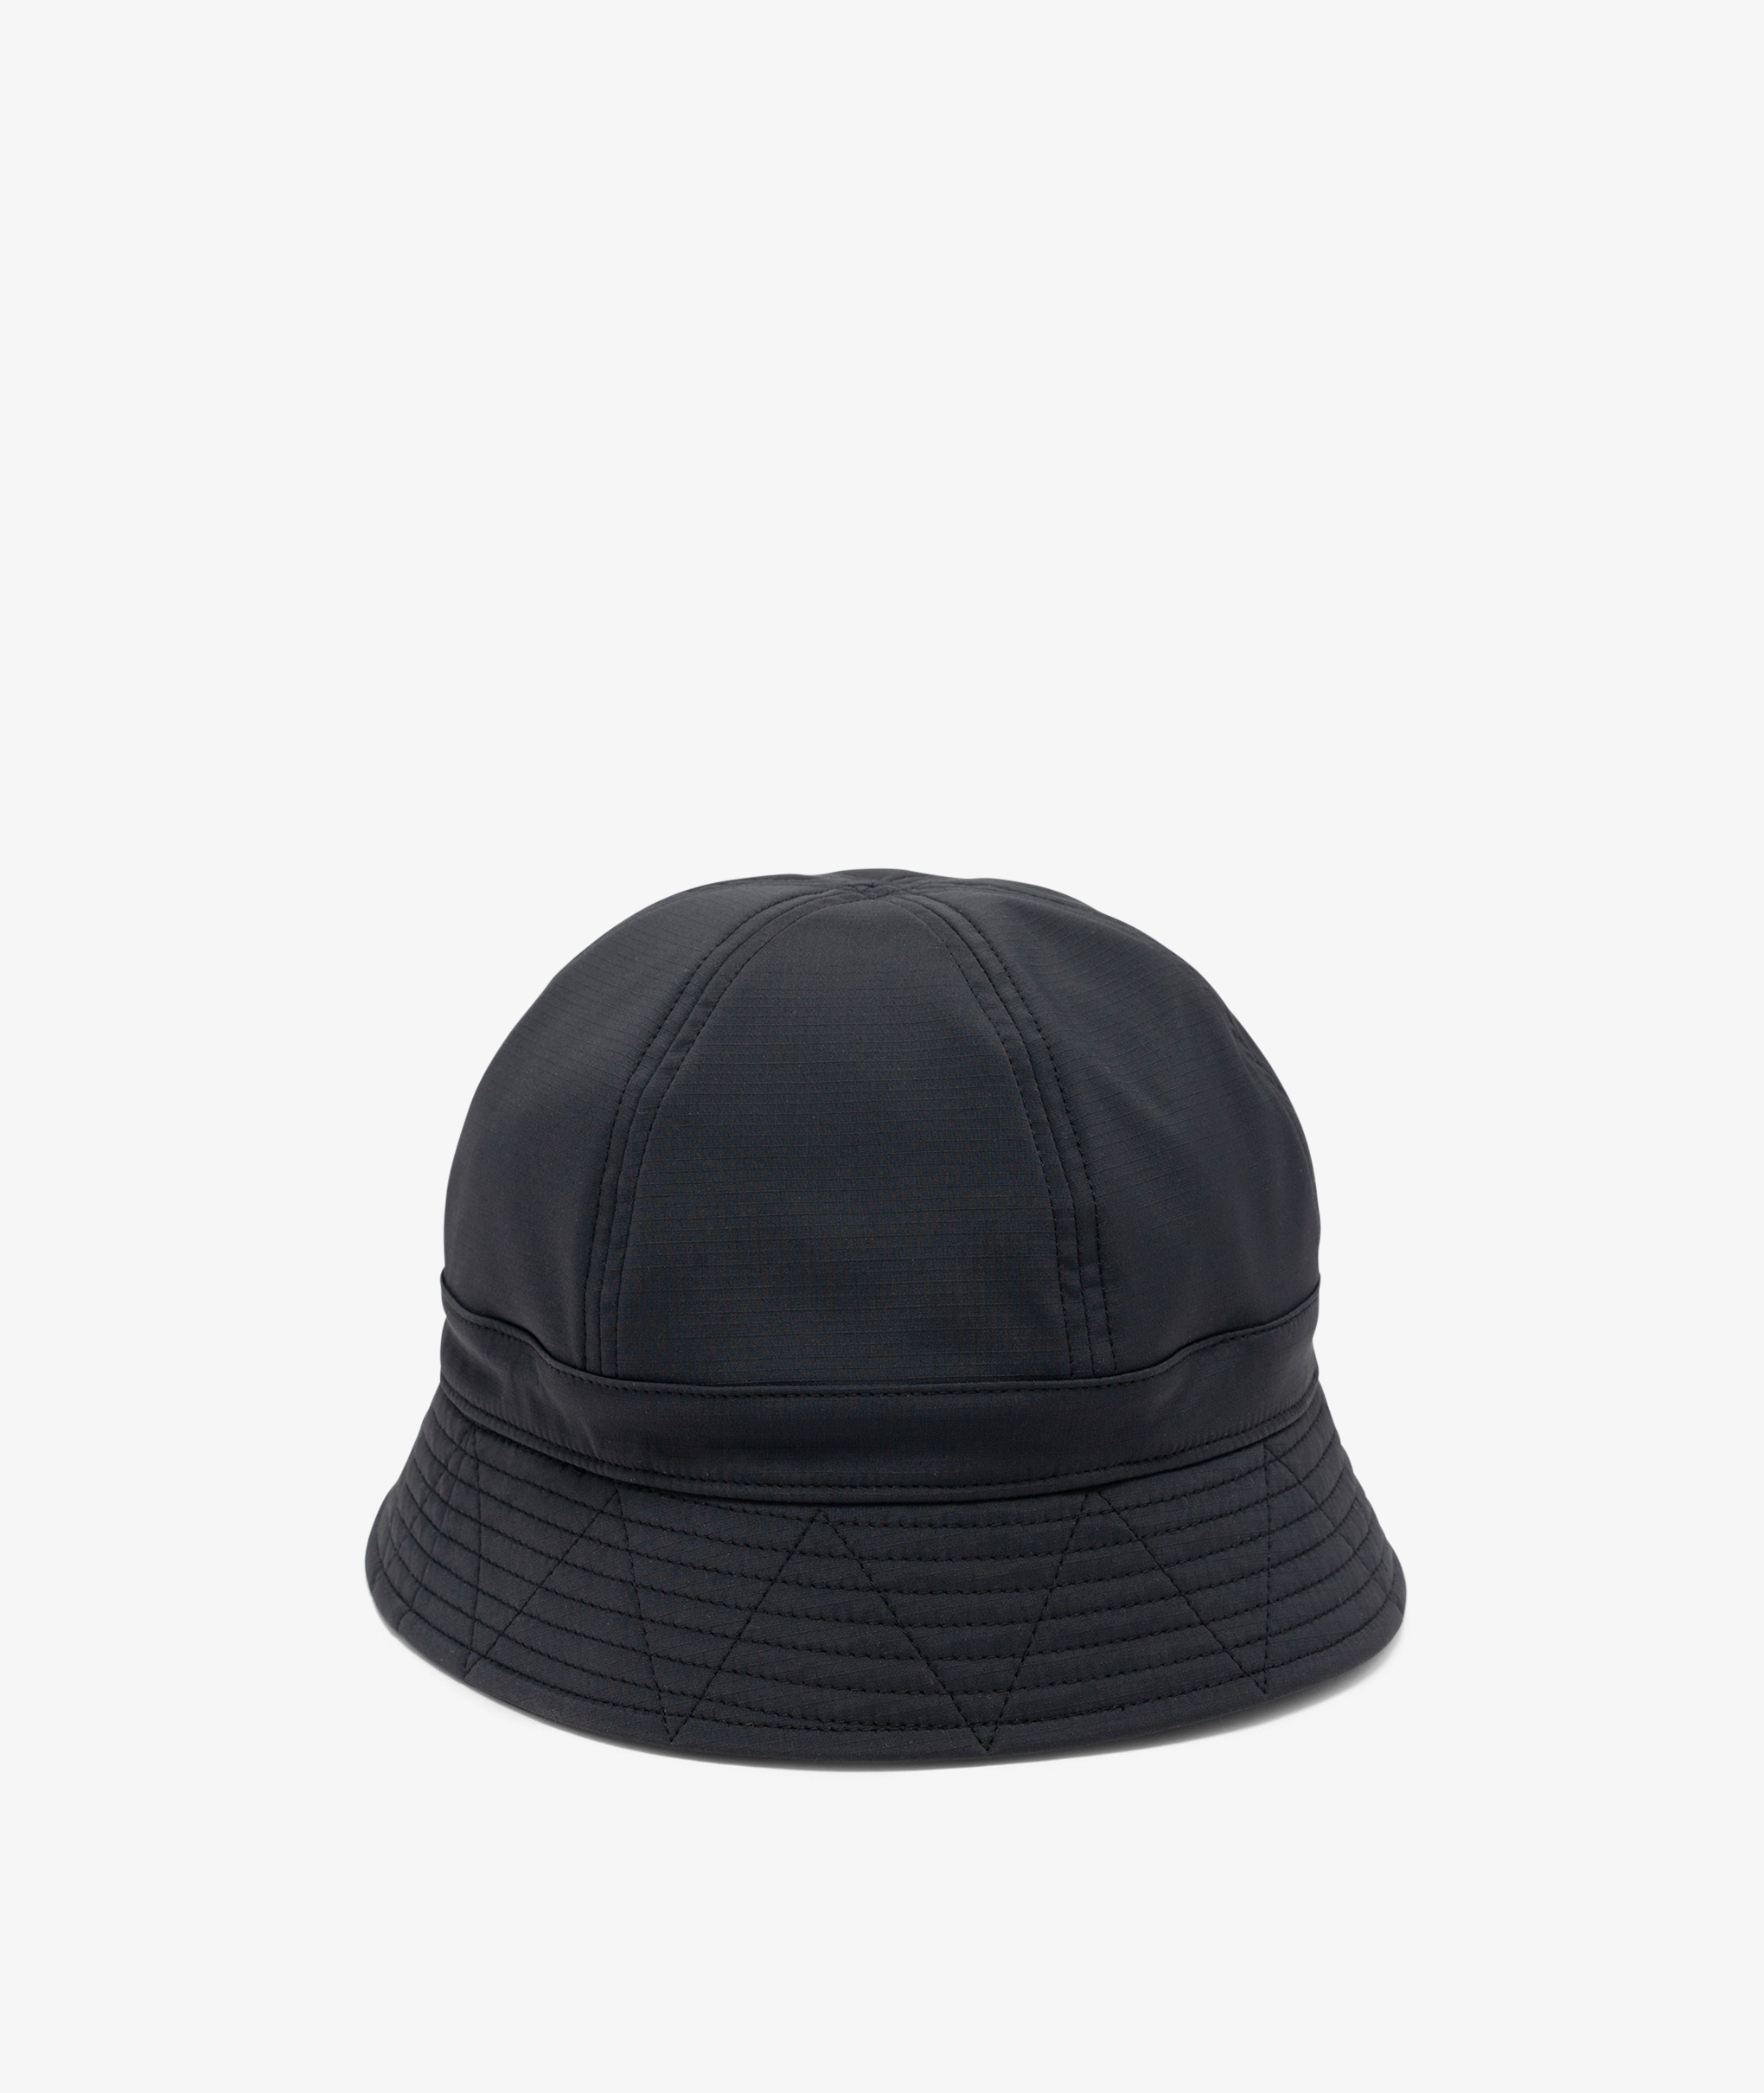 Norse Store  Shipping Worldwide - Haven Eclipse Hat - Black